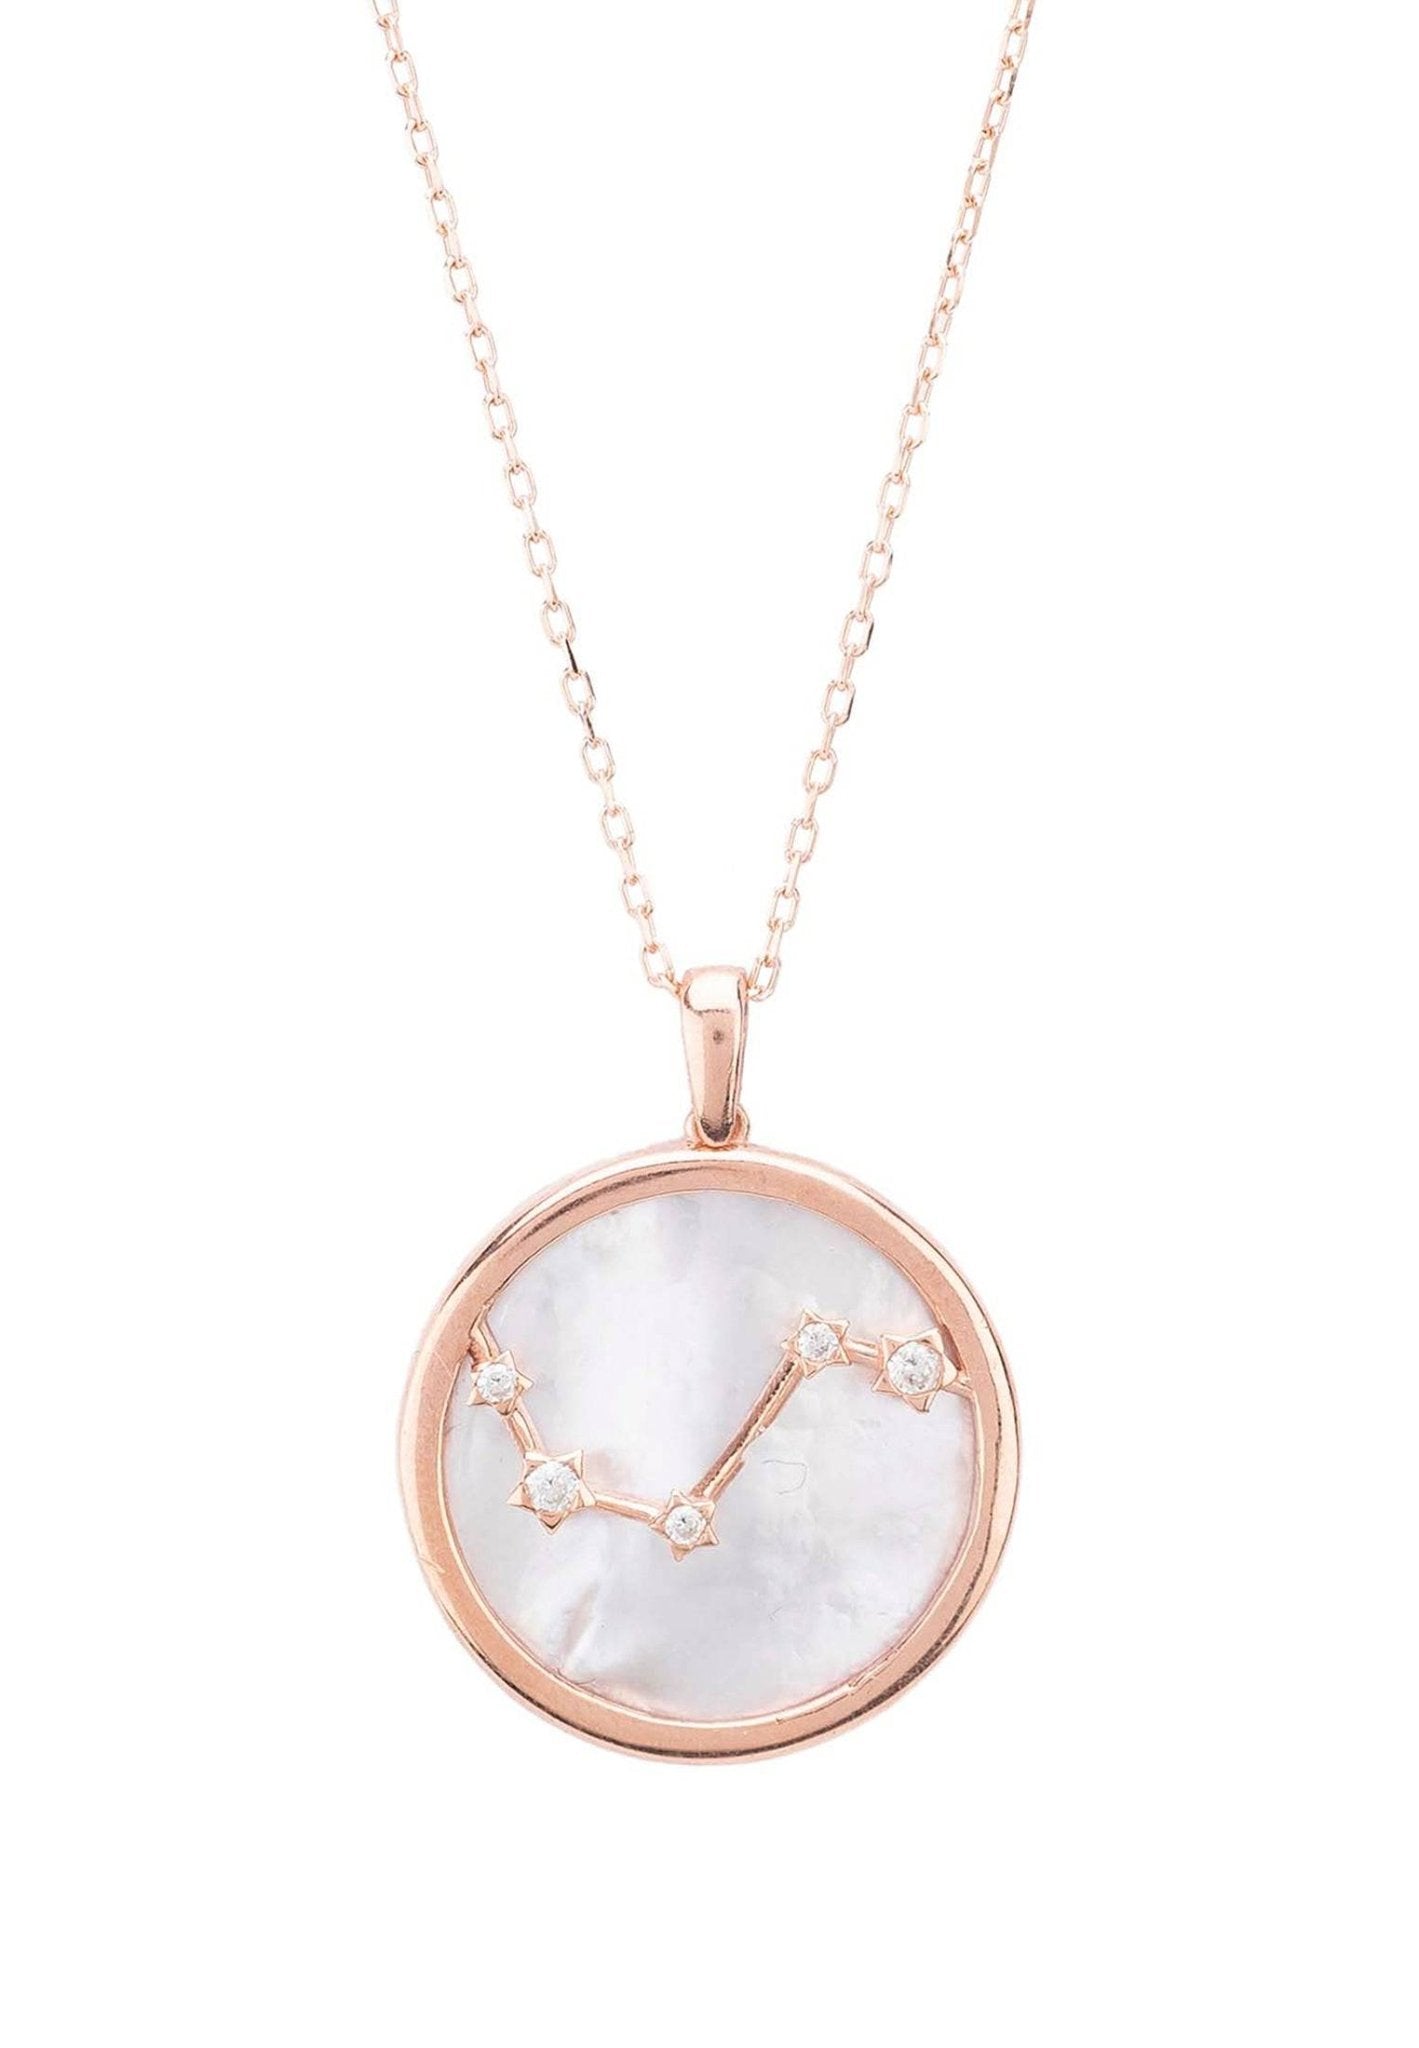 Zodiac Mother Of Pearl Gemstone Star Constellation Pendant Necklace Aries - LATELITA Necklaces